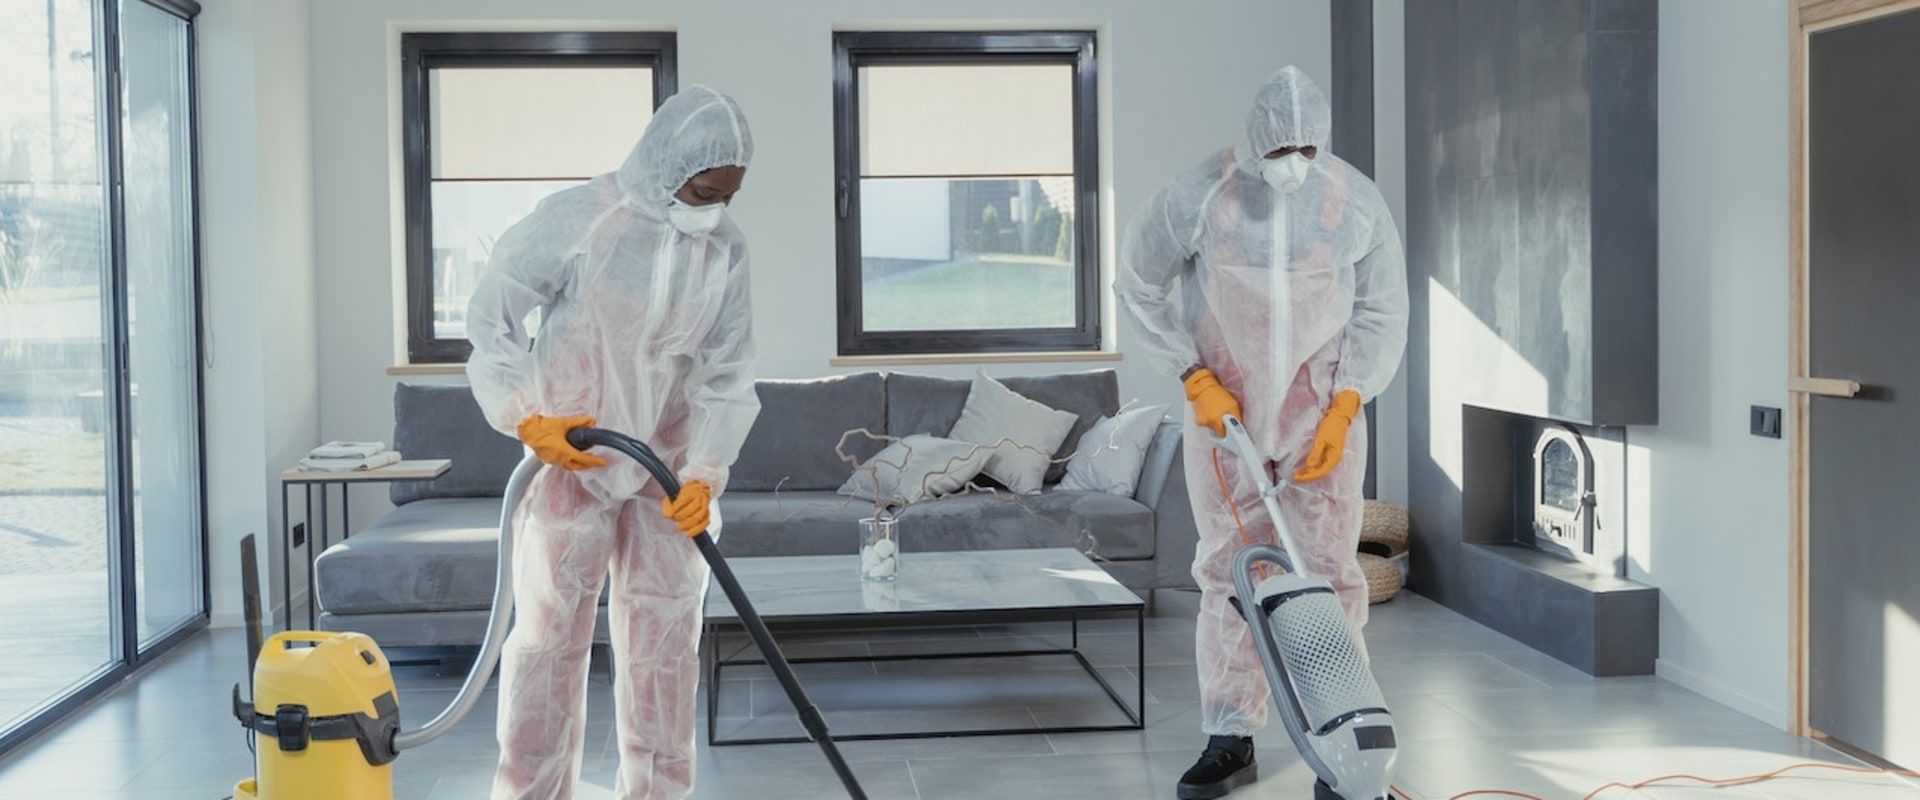 How Professional Cleaning Services Can Help You Pass Your Austin Home Inspection With Flying Colors